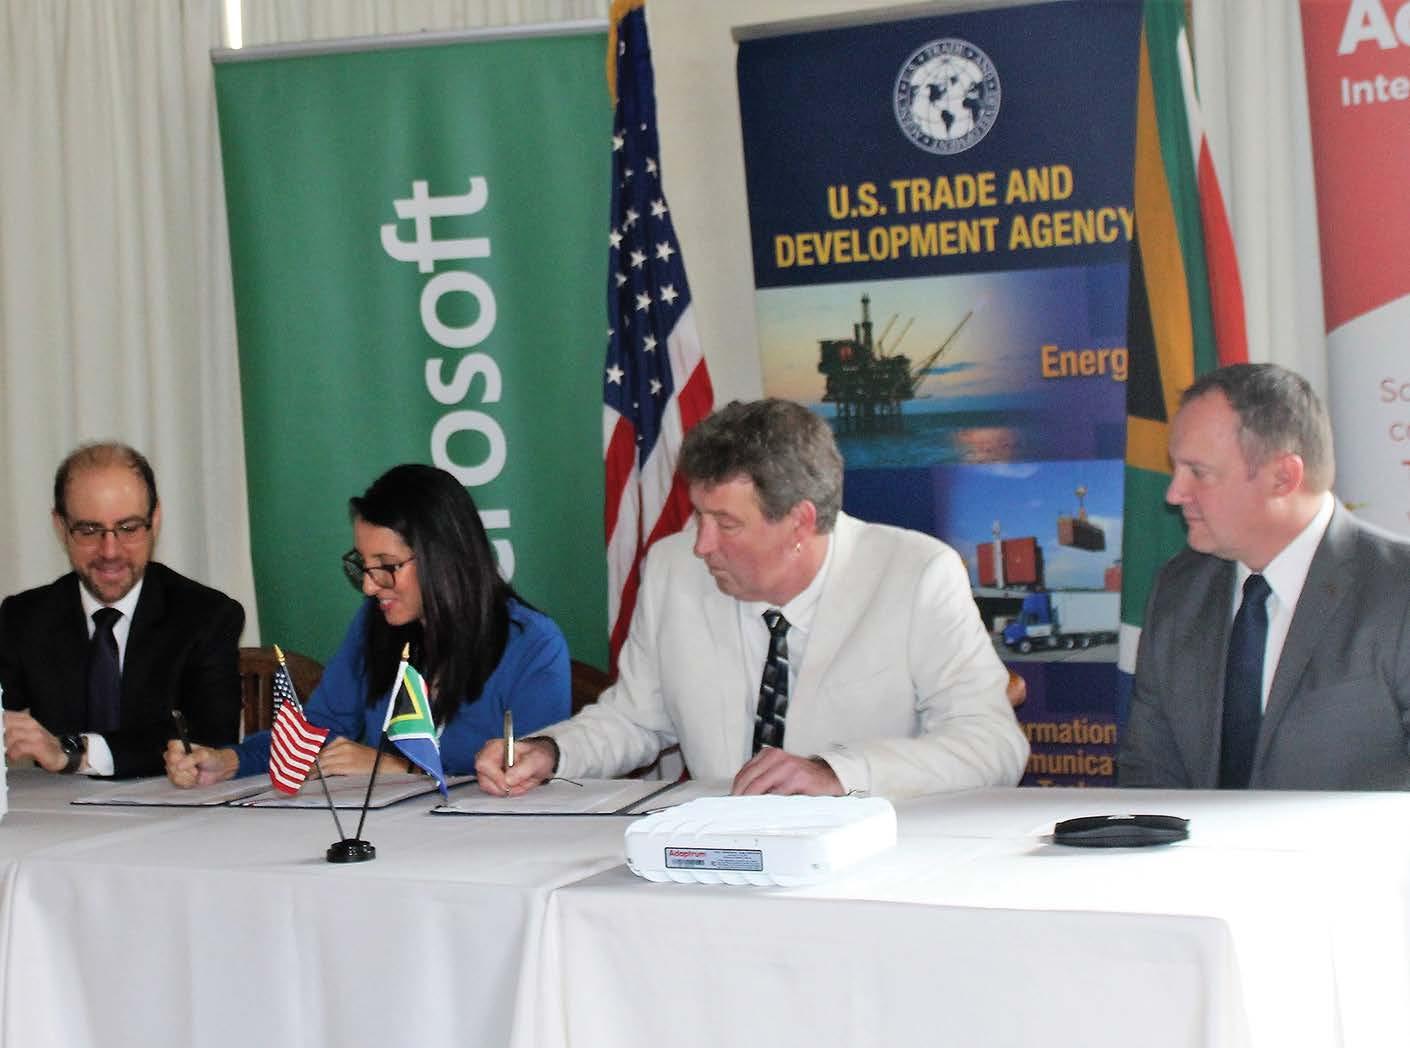 From left: Jacob Flewelling (USTDA), Hala Rharrit (US Durban Consulate), Paul Colmer (WAPA) and Timothy Driessel, (Mia Voice and Data).